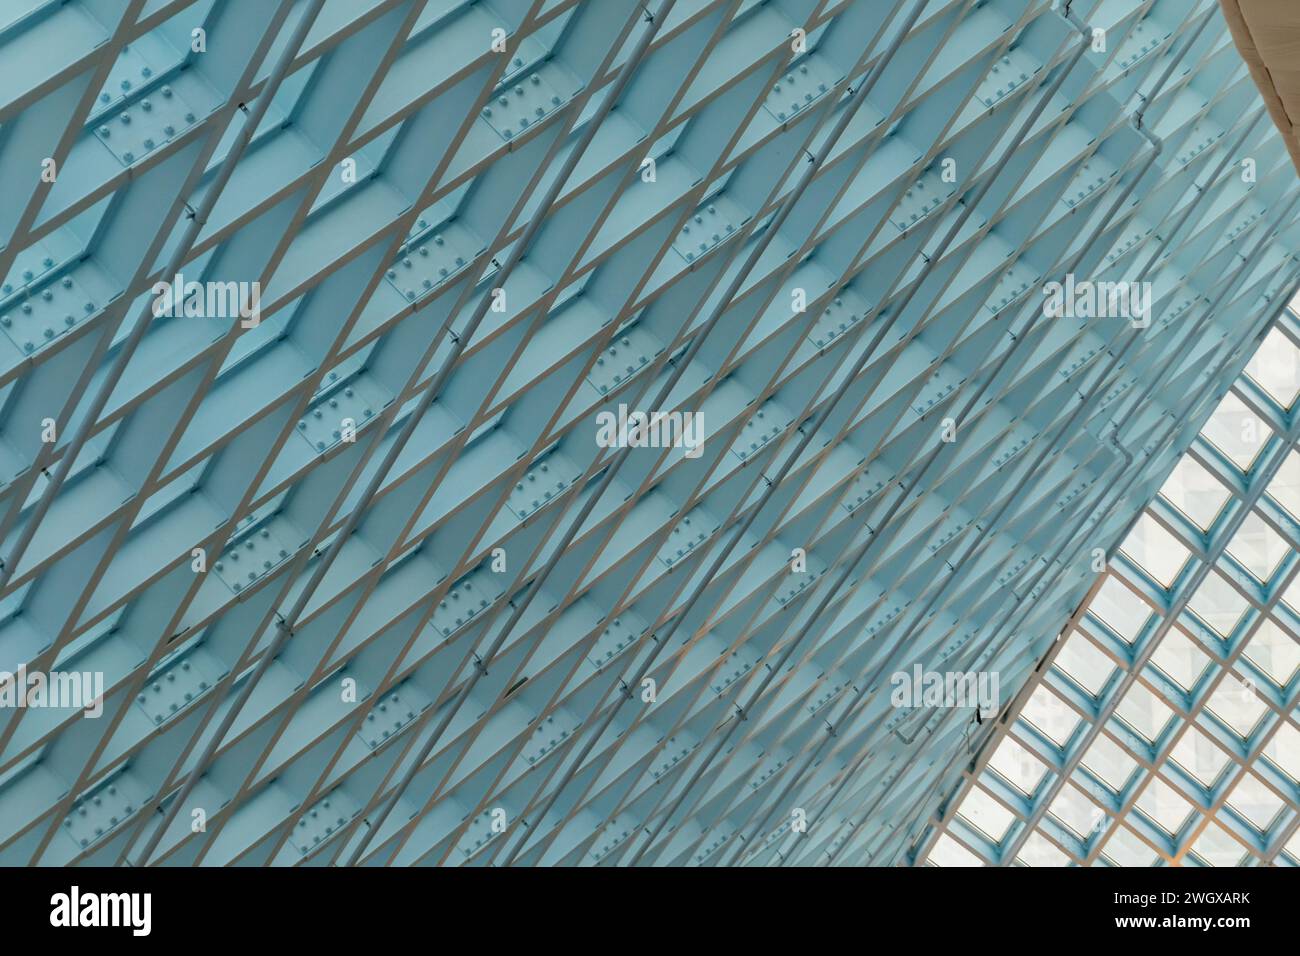 Seattle, WA, US-October 22, 2019: Geometric shapes and windows in the ceiling of the Seattle Public Library. Stock Photo